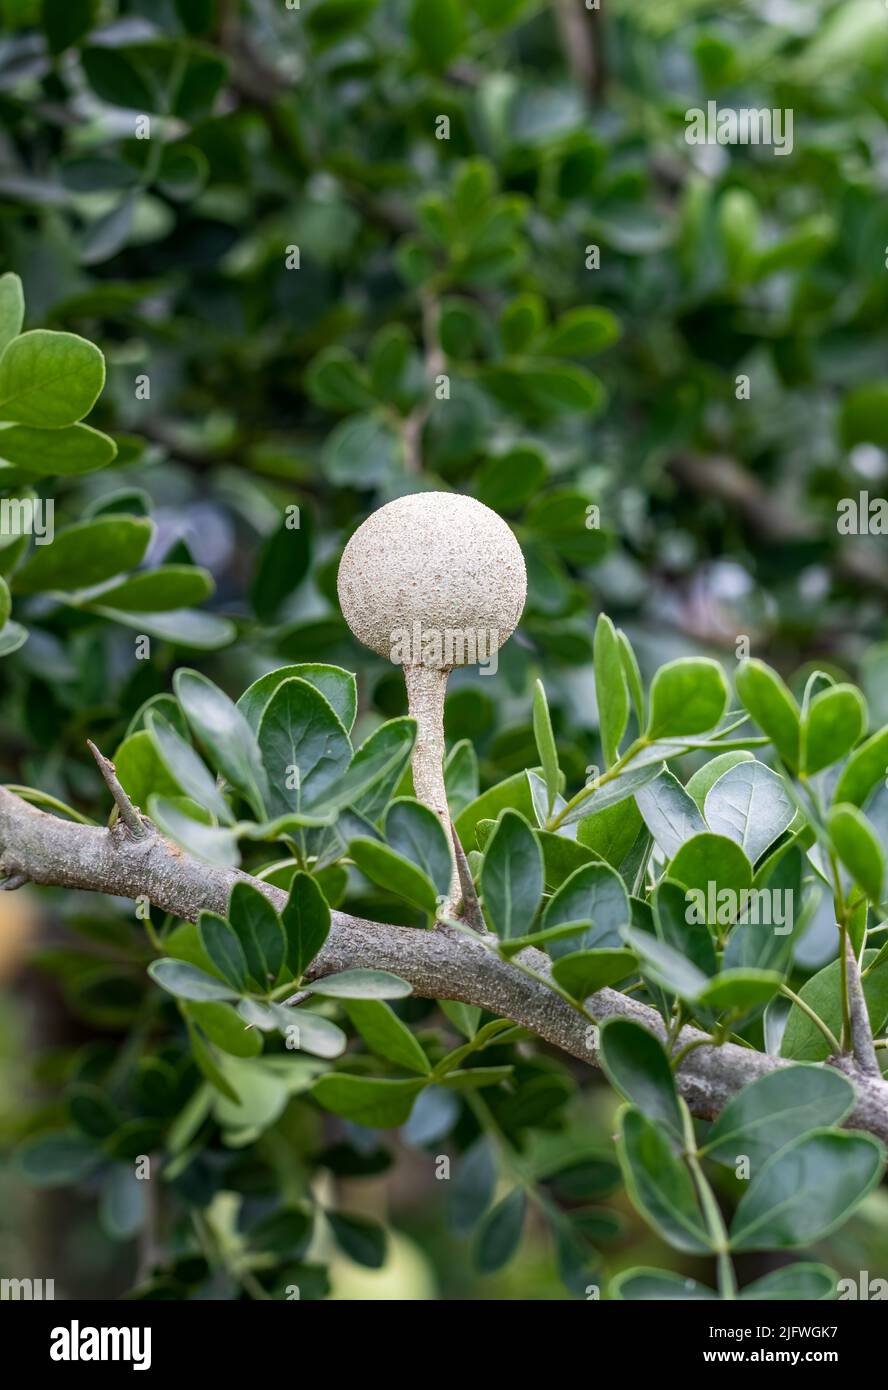 Young limonia acidissima or wood apple growing on the tree with copy space Stock Photo